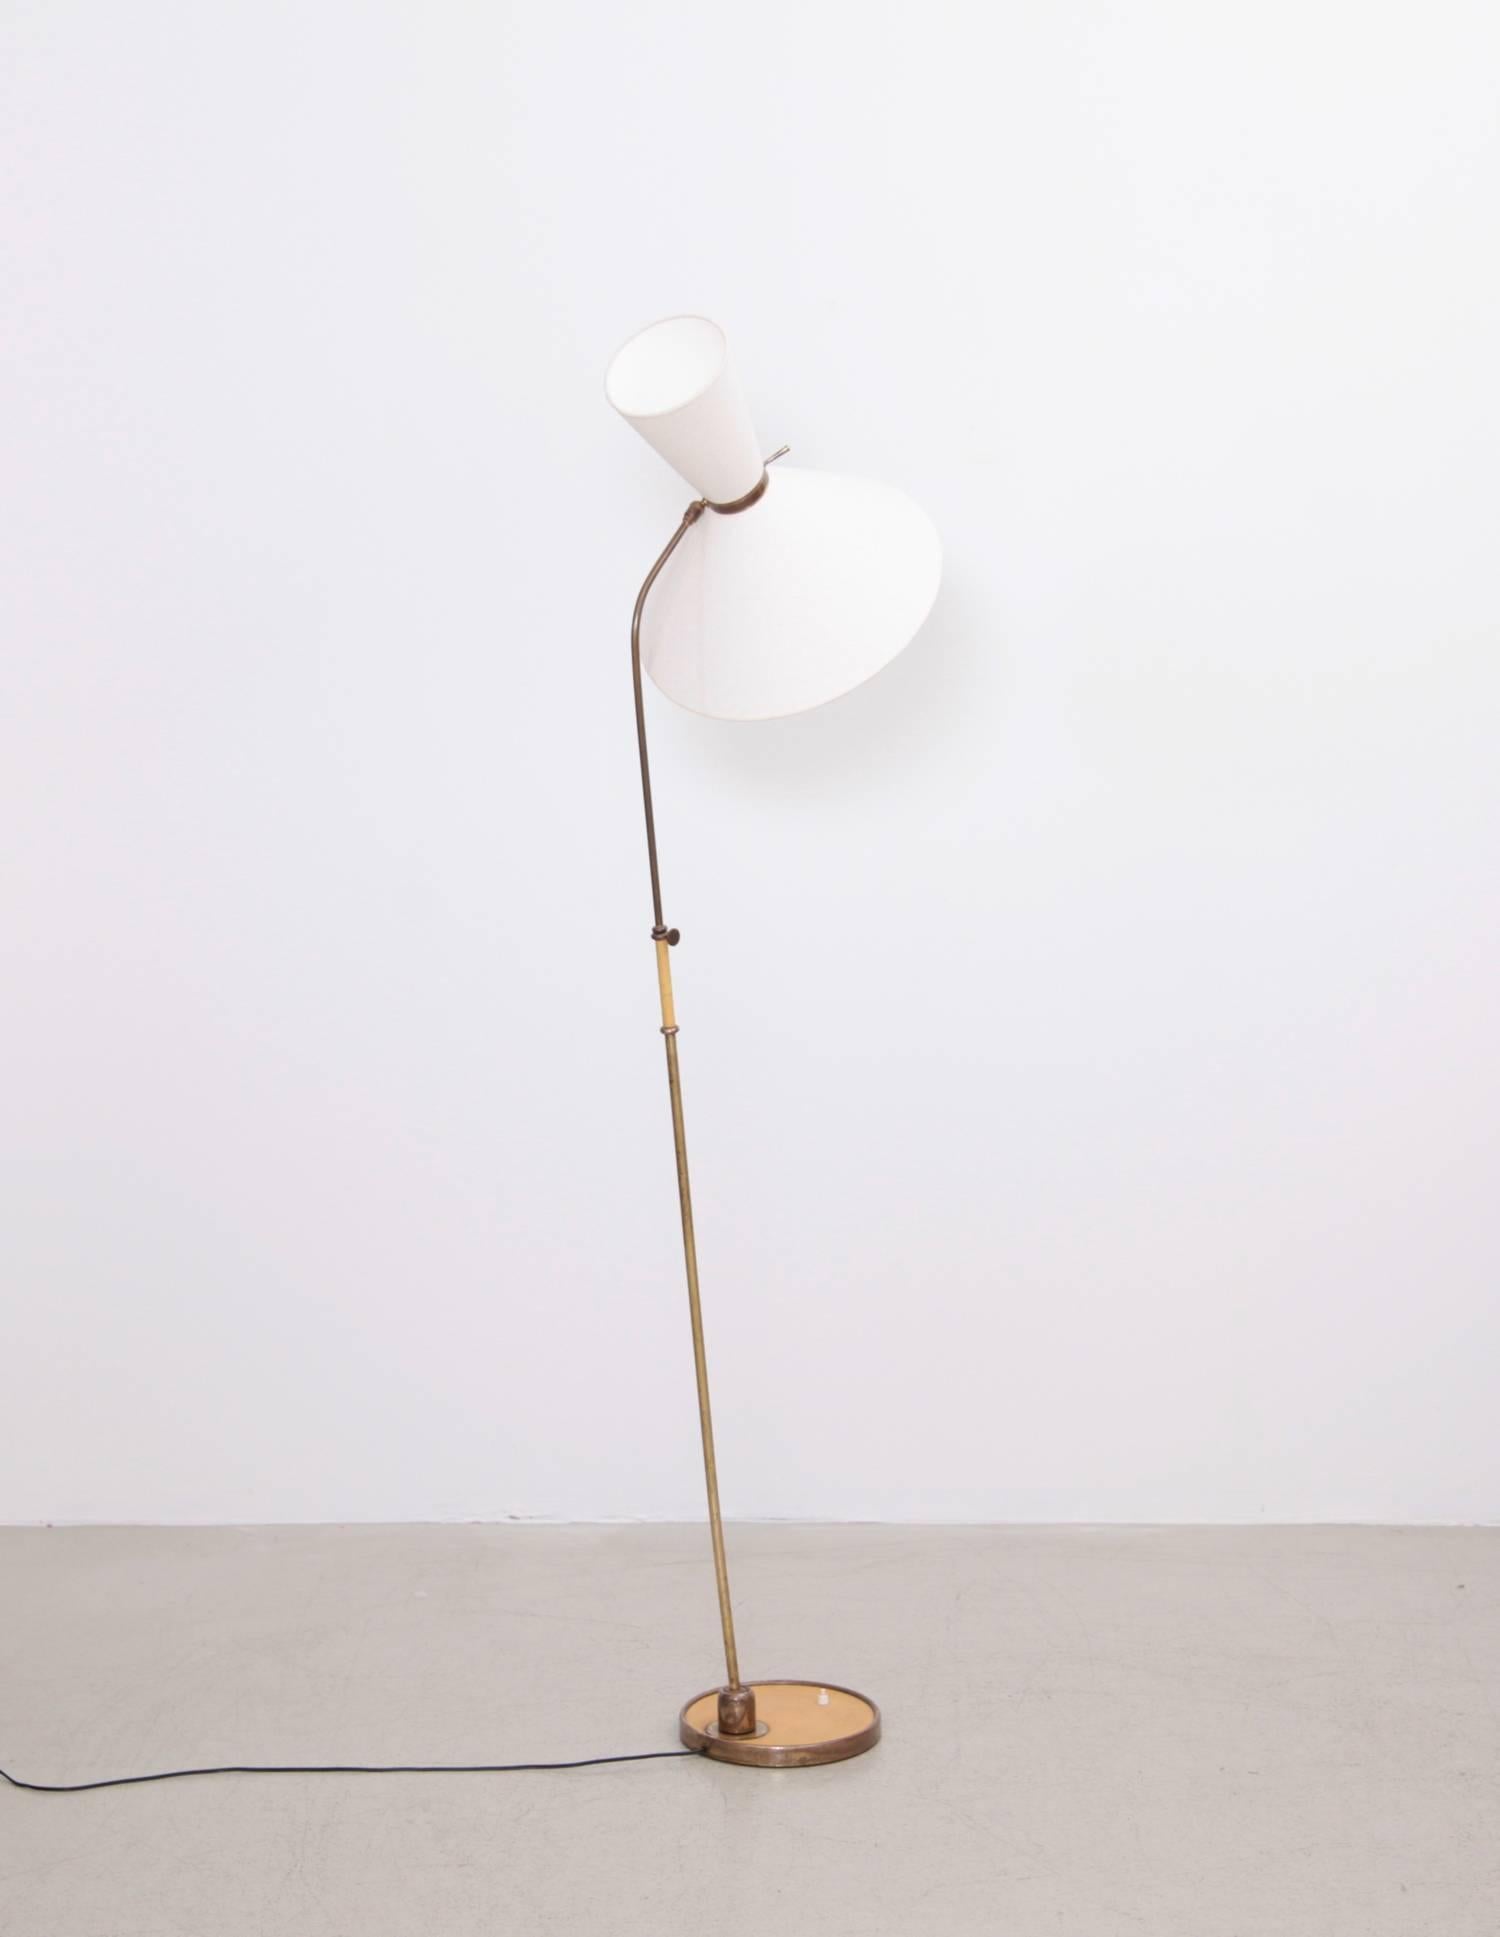 Mid-20th Century Adjustable Diabolo Floor Lamp by Lunel in Brass and Laminate, France, circa 1950